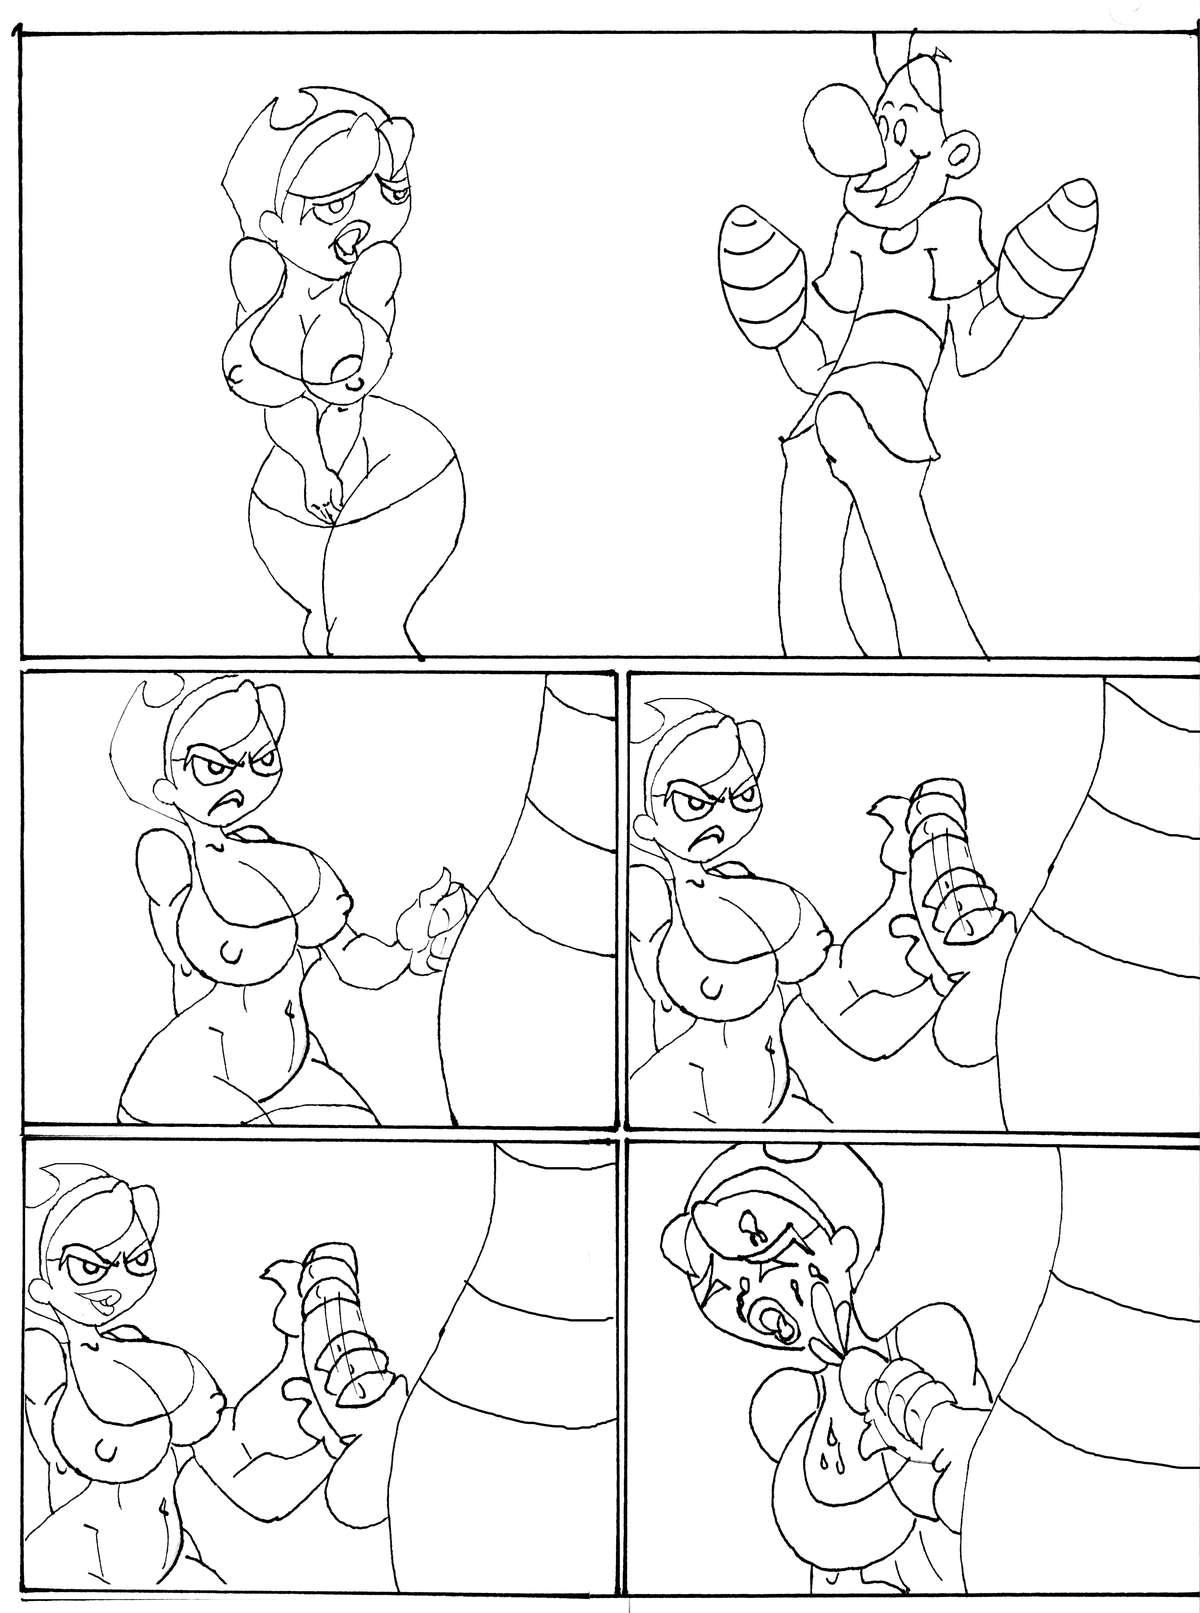 Ass Fucking billy y mandy - The grim adventures of billy and mandy Leaked - Page 5